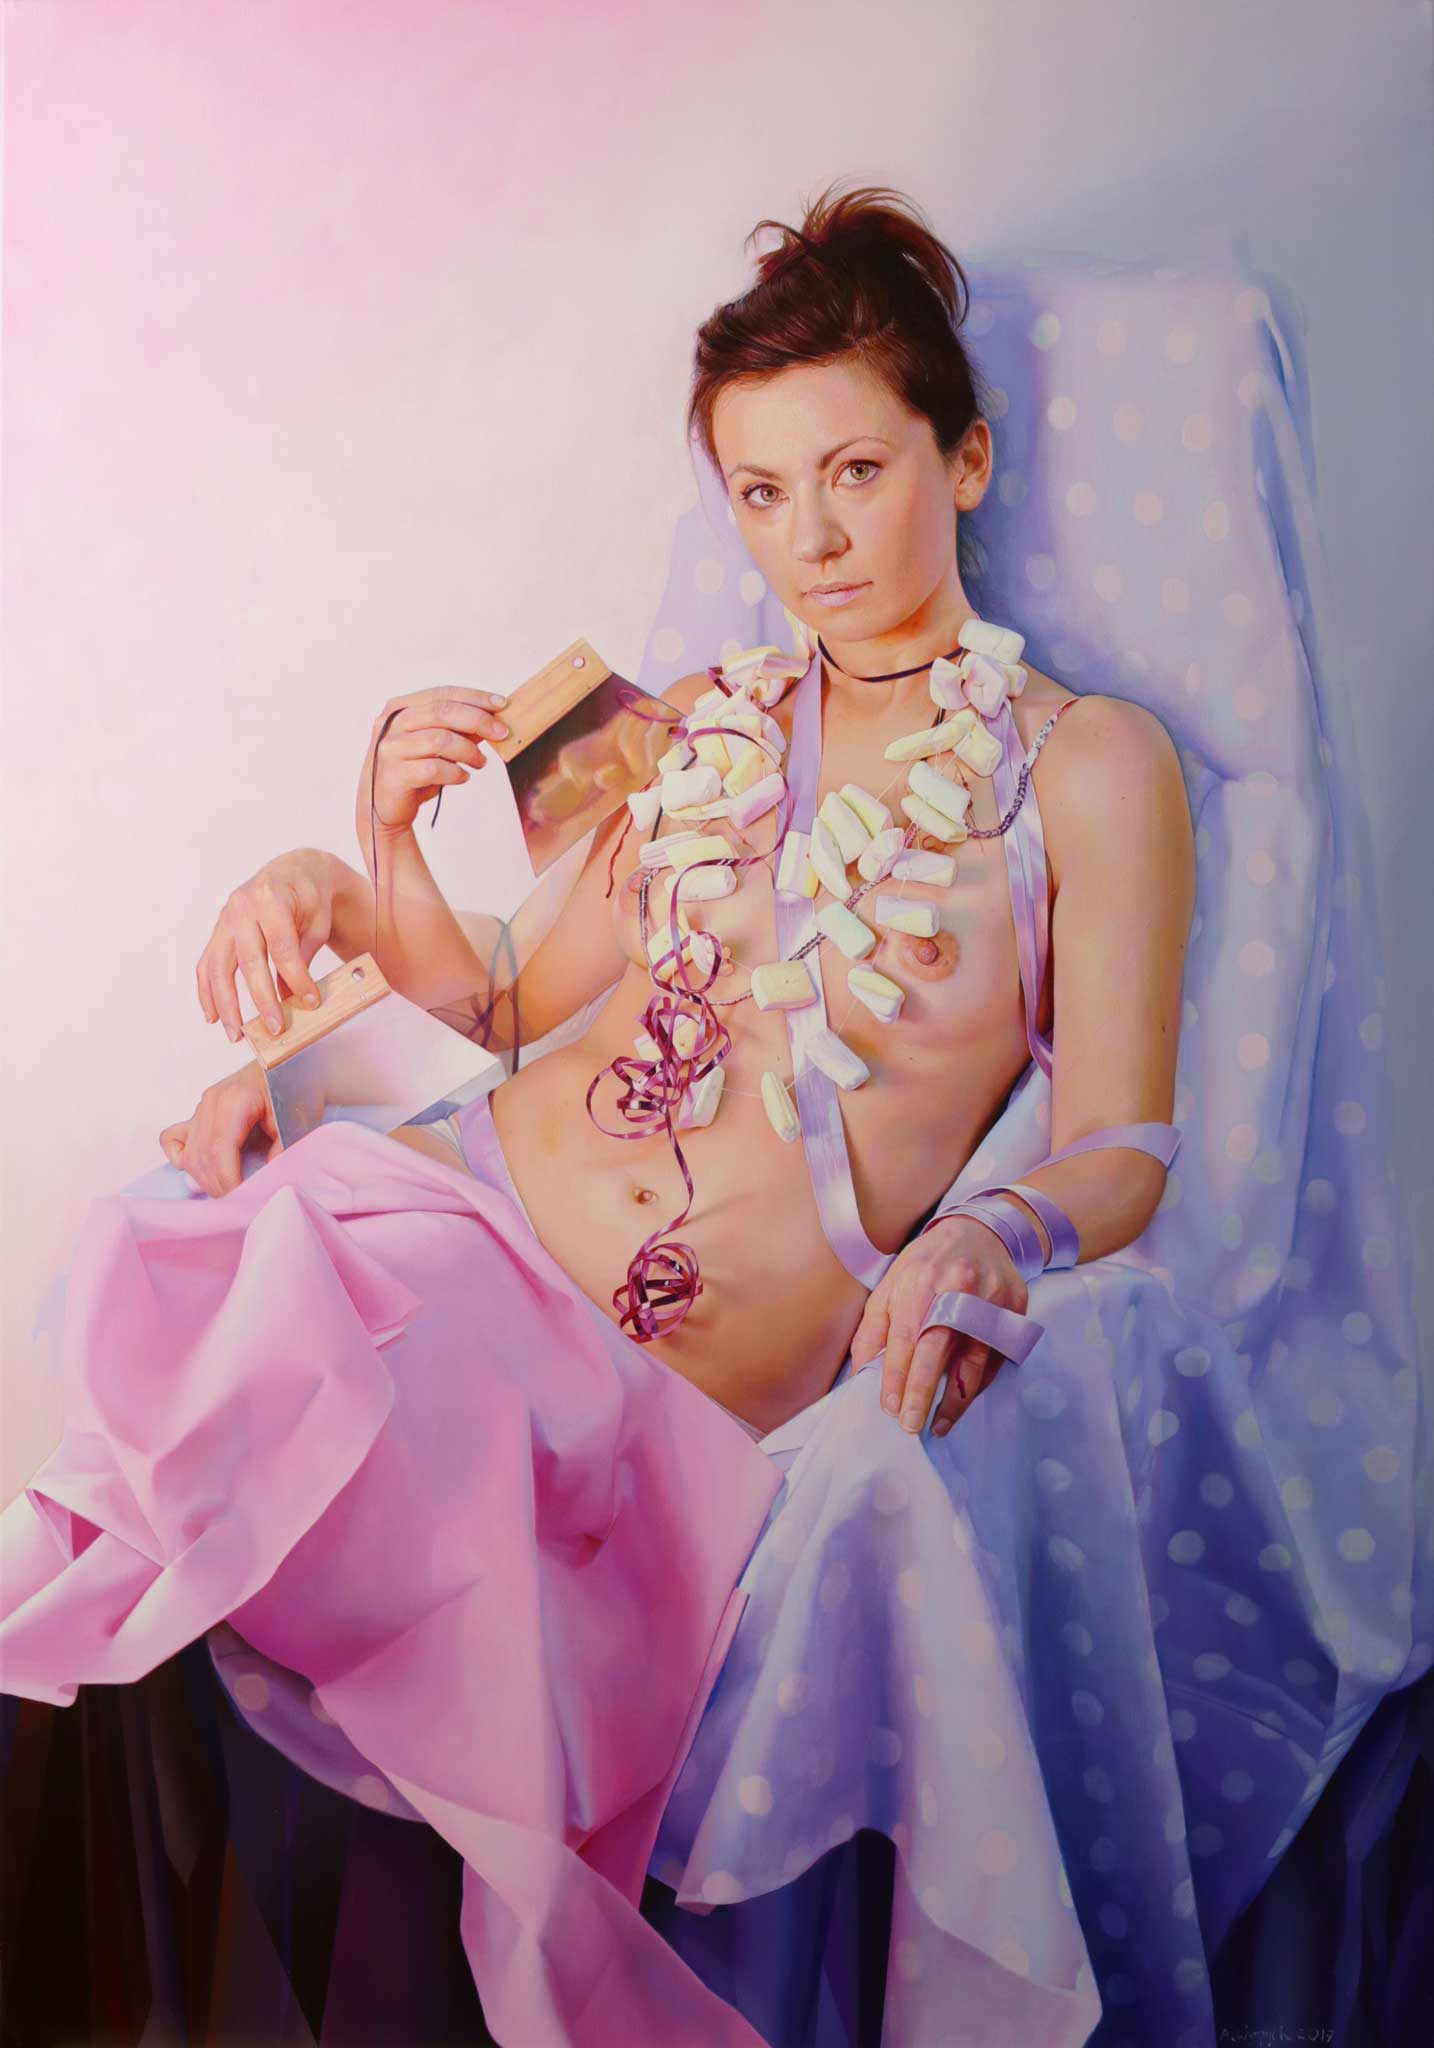 Contemporary figure paintings - Anna Wypych - RealismToday.com